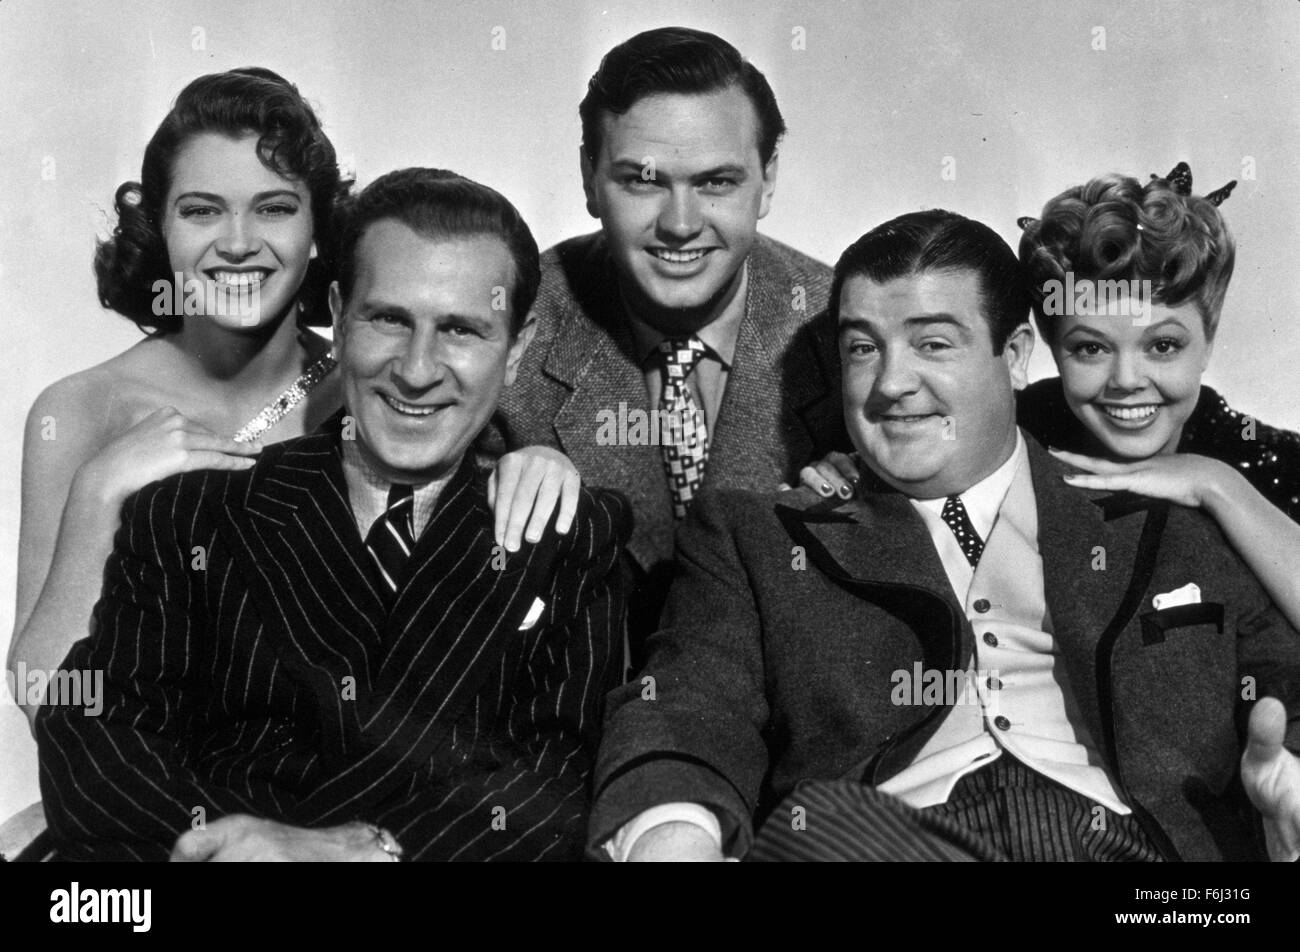 1945, Film Title: ABBOTT AND COSTELLO IN HOLLYWOOD, Director: SYLVAN S SIMON, Studio: MGM, Pictured: BUD ABBOTT, COMEDY (SLAPSTICK), COMEDY TEAM, LOU COSTELLO, HOLLYWOOD LIFE (COMEDY), JEAN PORTER, FRANCES RAFFERTY, SYLVAN S SIMON. (Credit Image: SNAP) Stock Photo